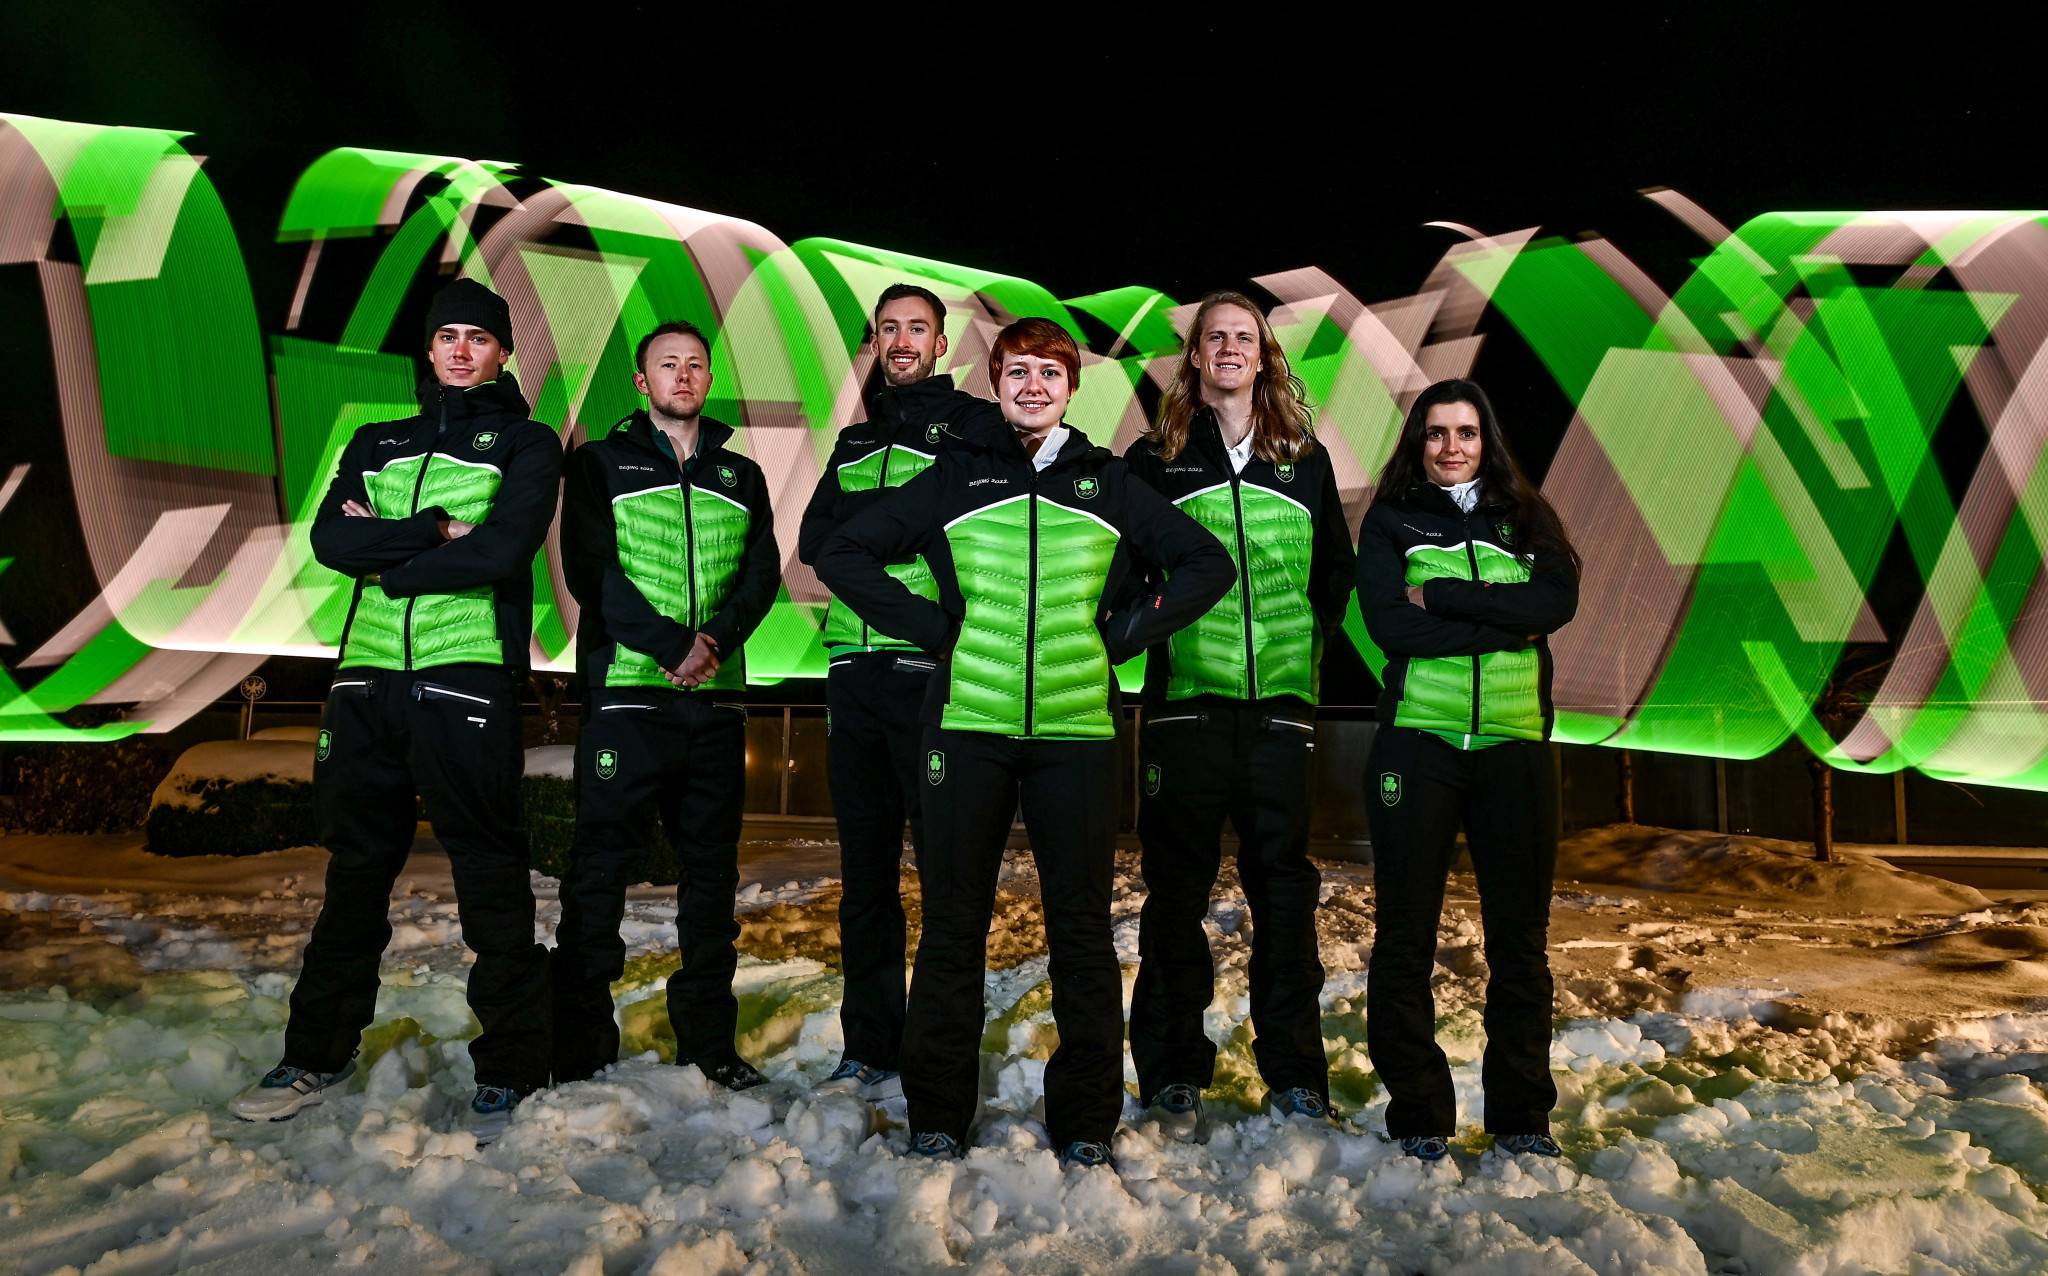 Ireland's six-strong team will wear VIST clothing at the Winter Olympics in Beijing ©Getty Images